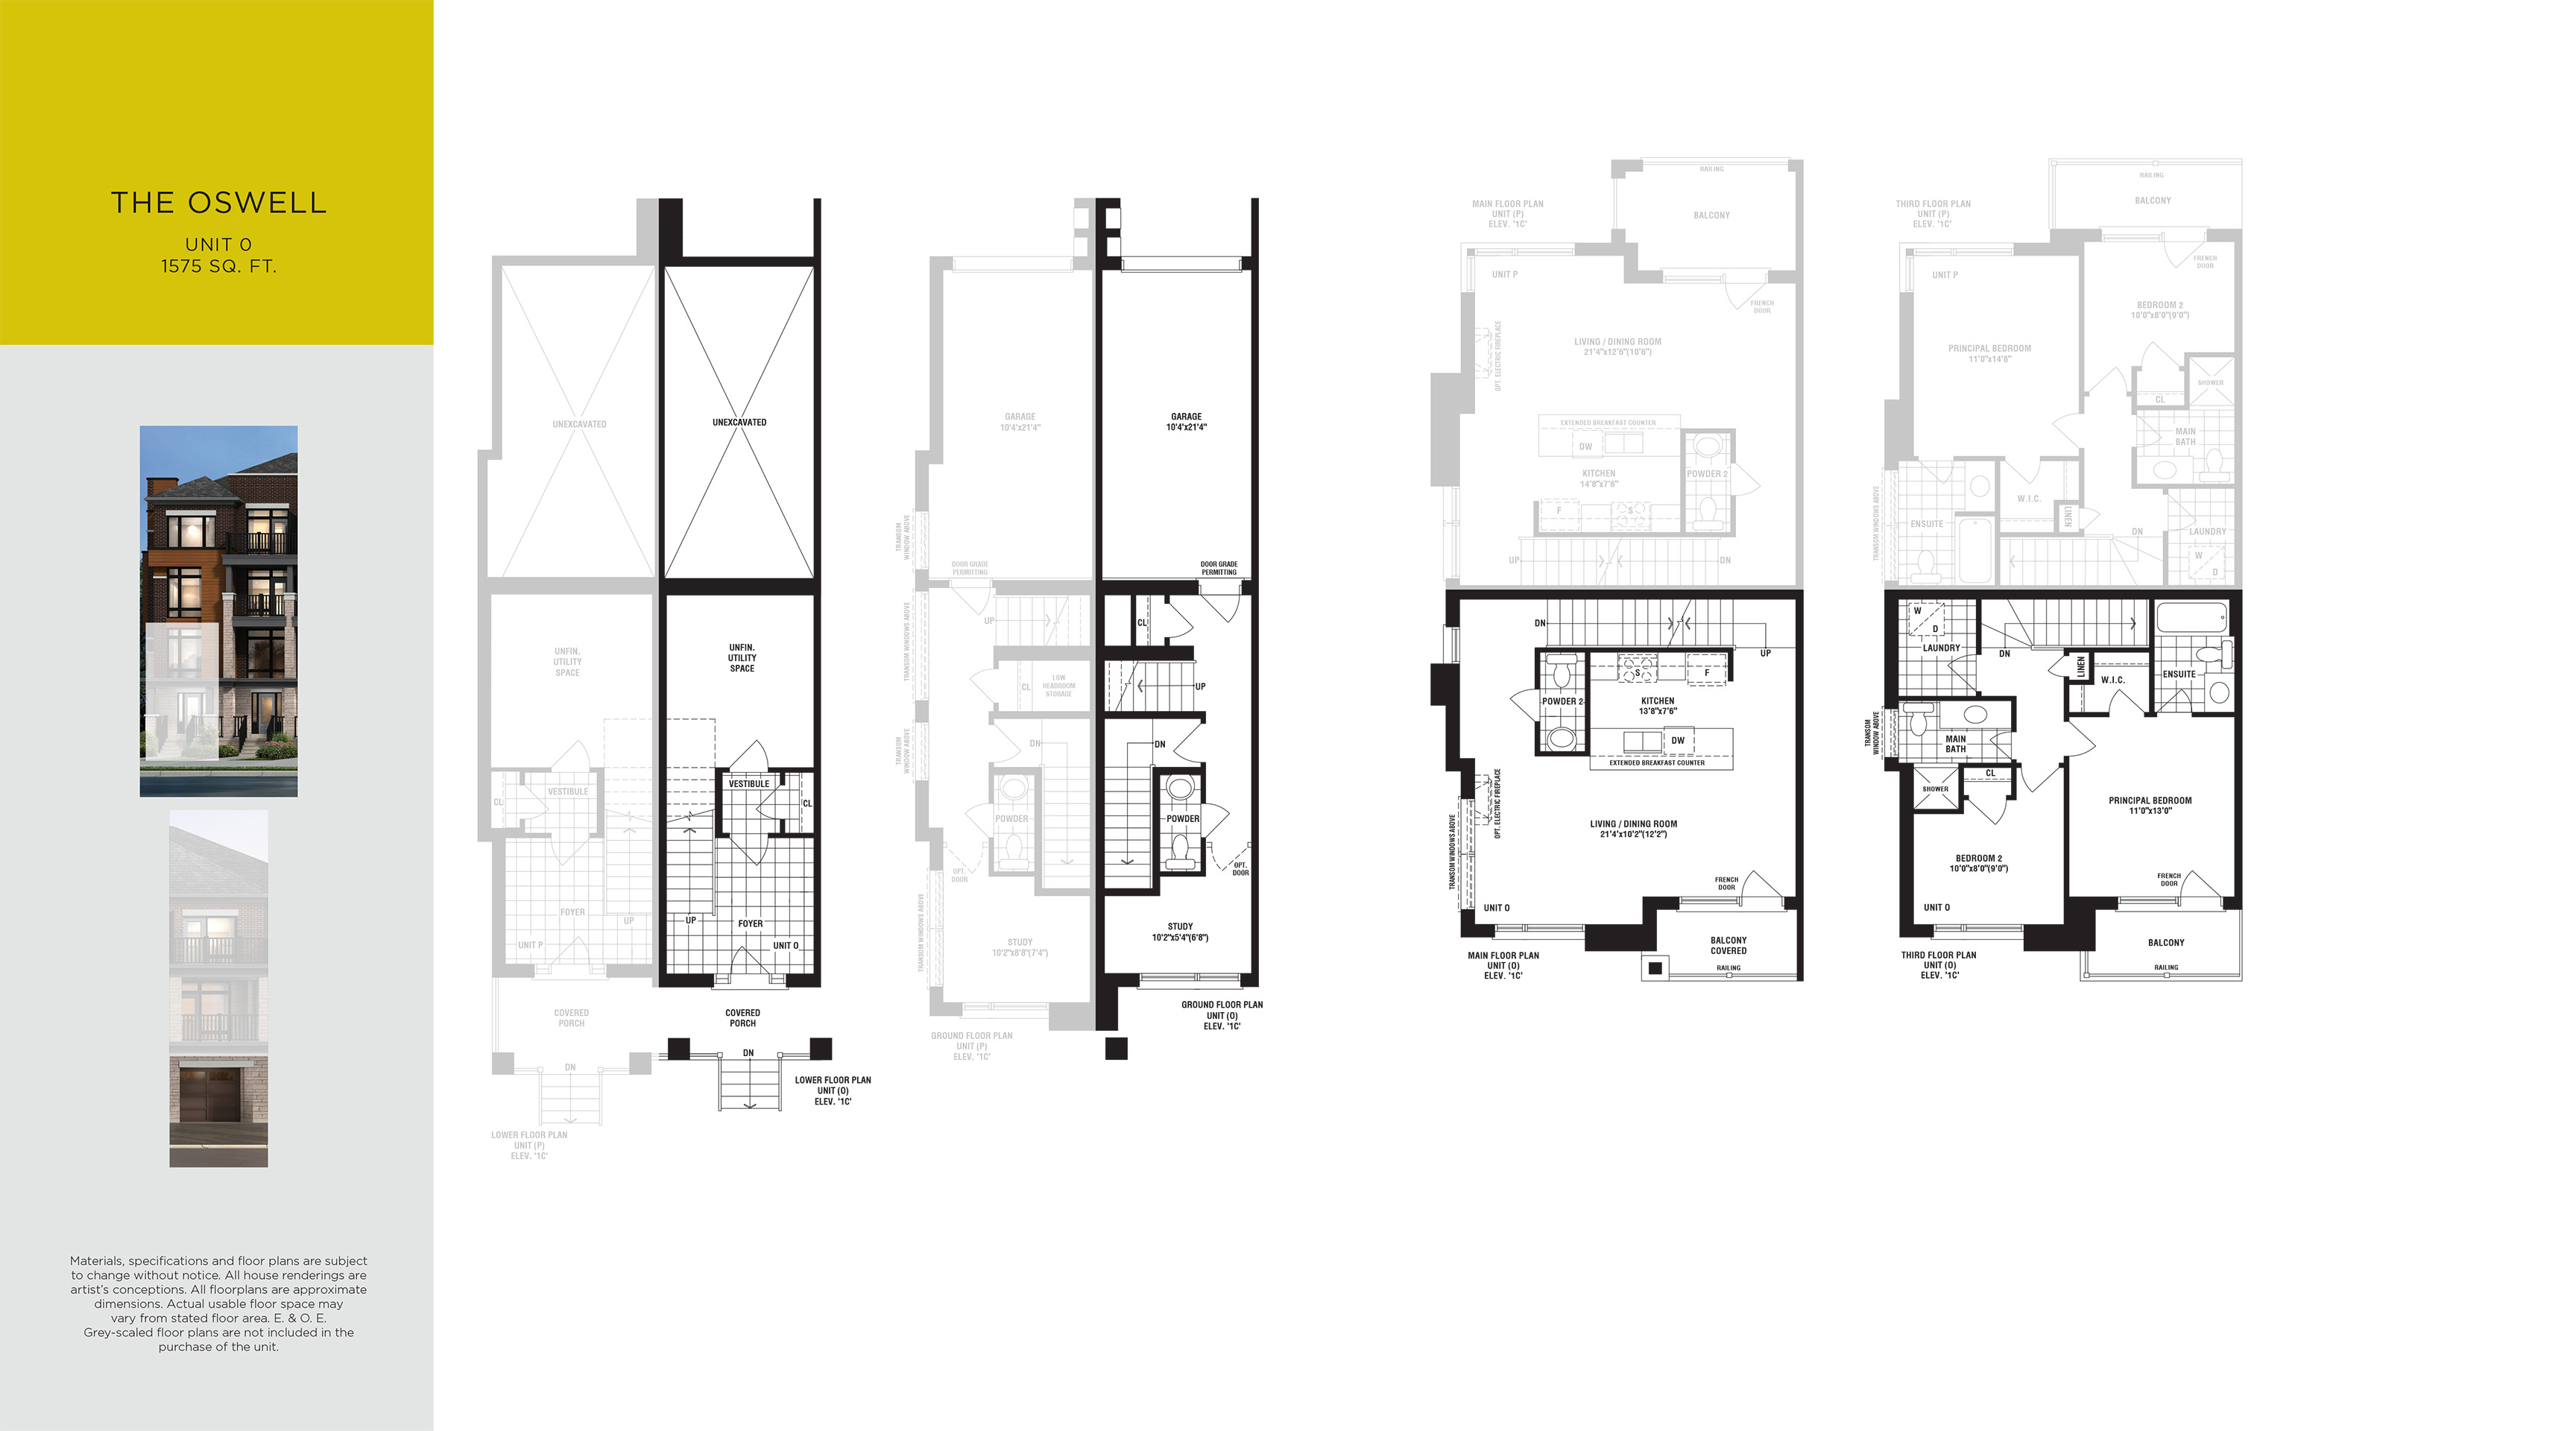  Floor Plan of ATowns with undefined beds